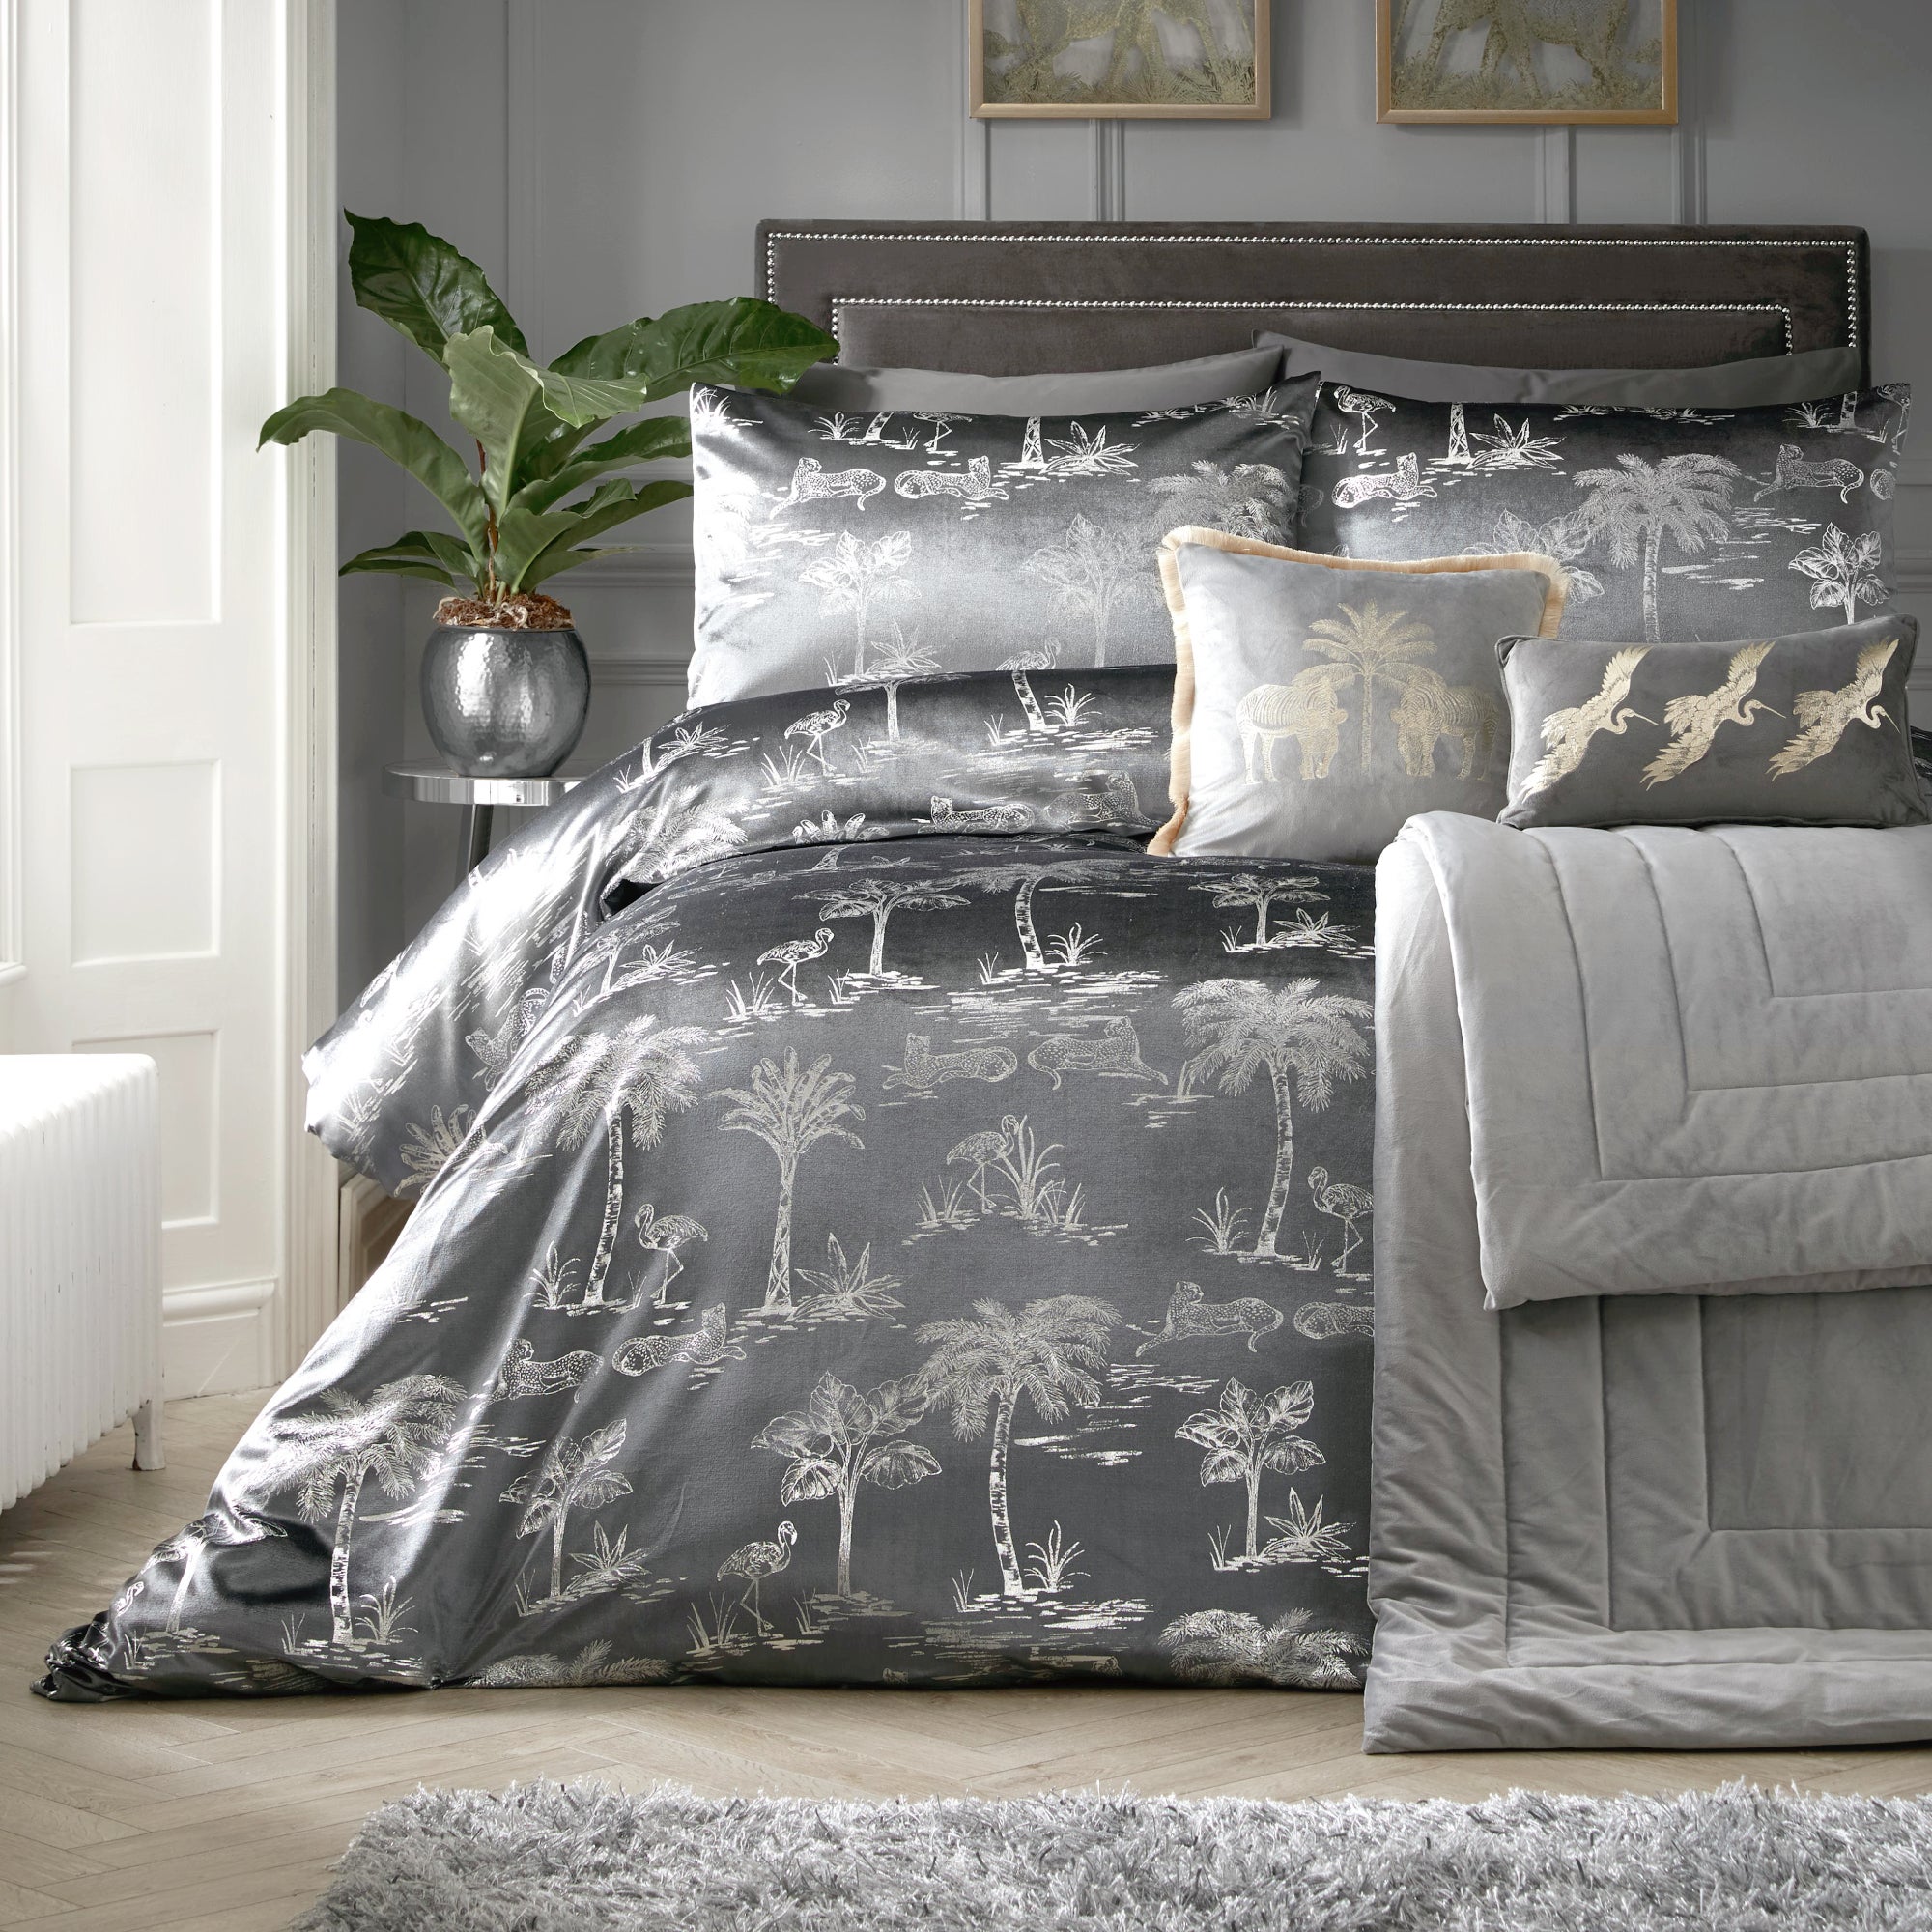 Oasis Patterened Duvet Cover And Pillowcase Set Slate Grey Grey